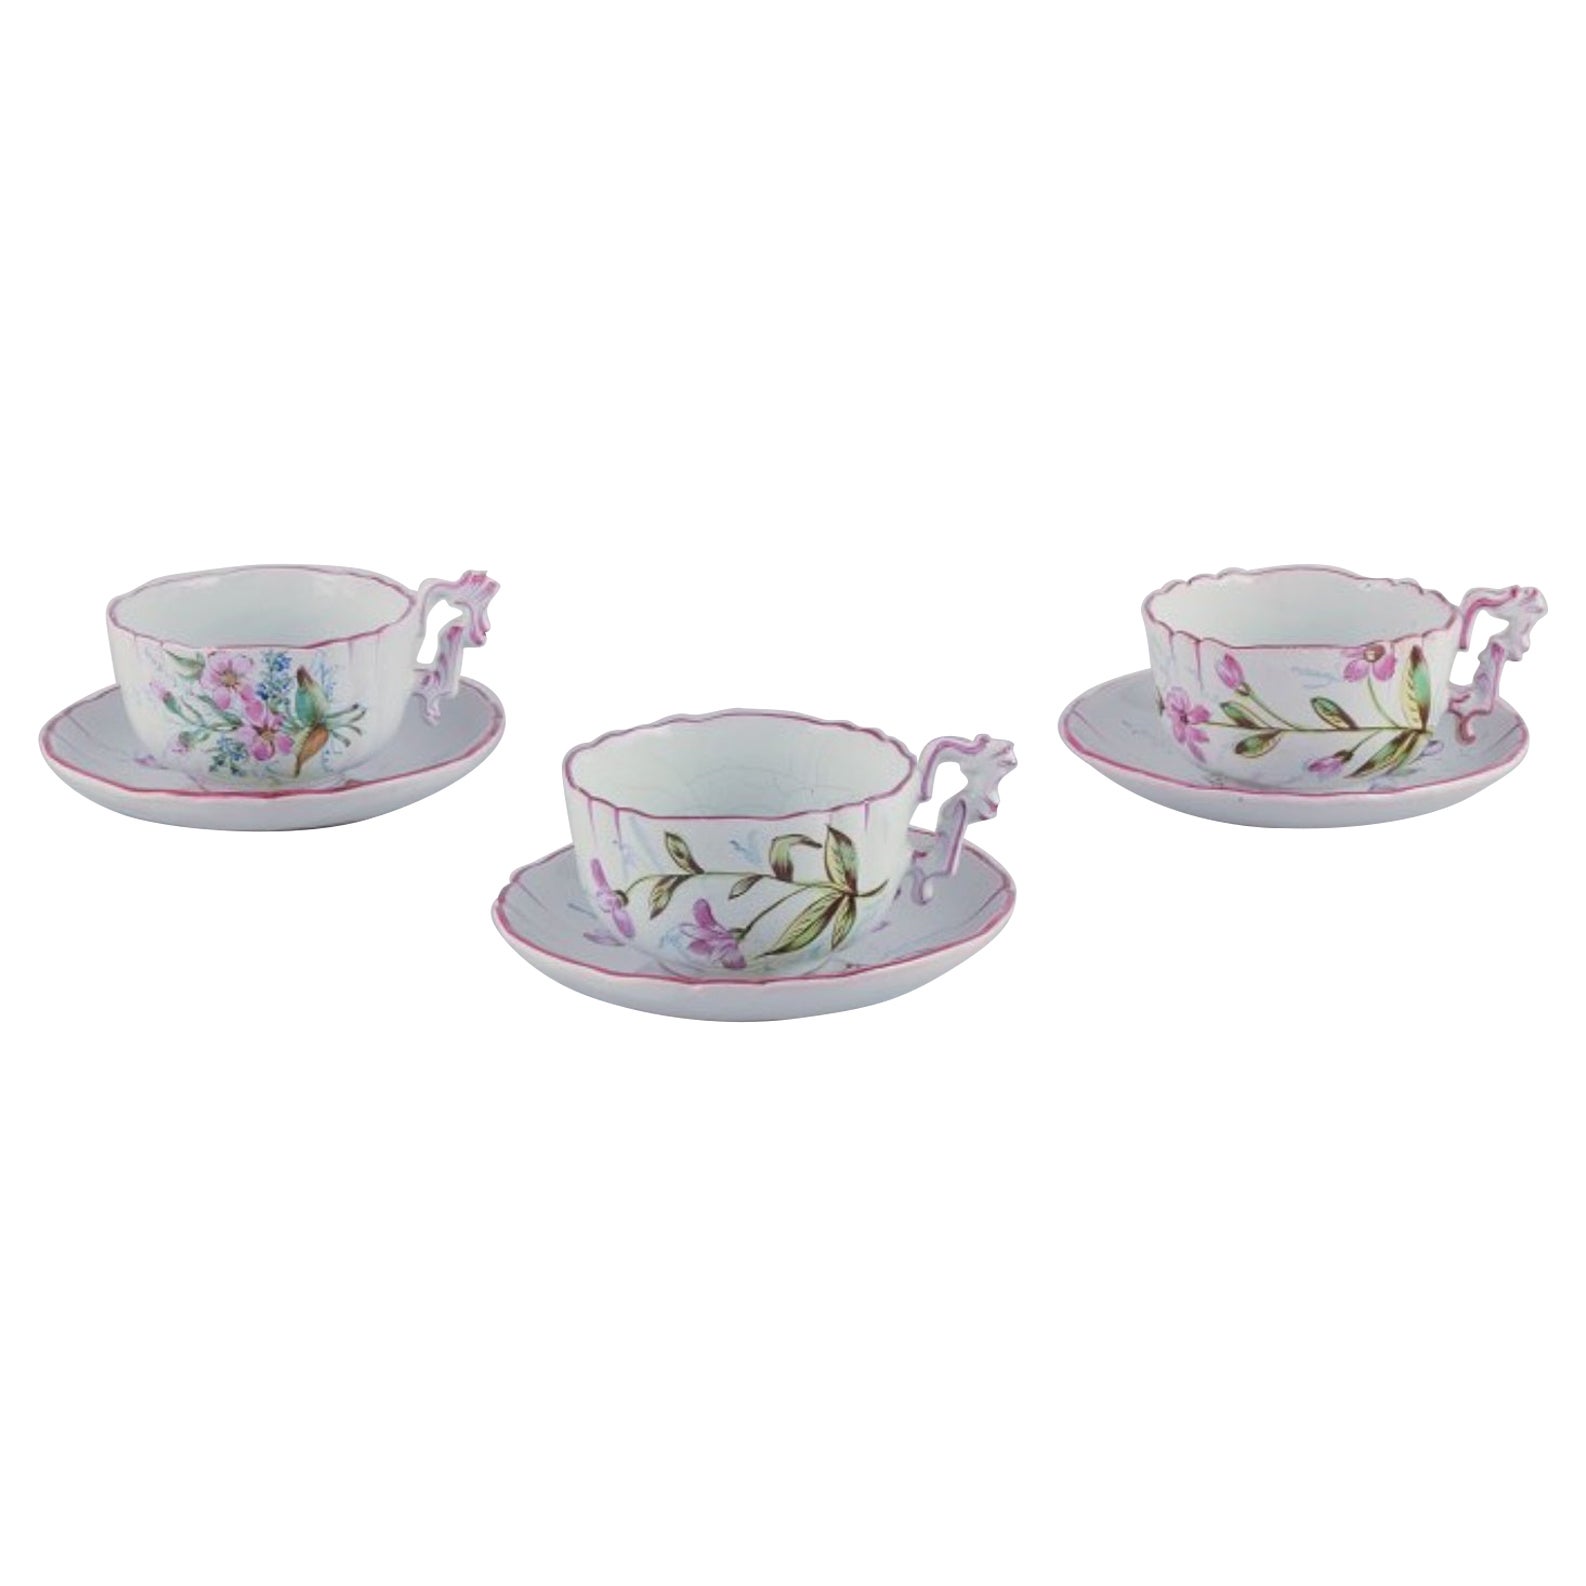 Three hand-painted tea cups and saucers in faience with motifs of flowers. For Sale